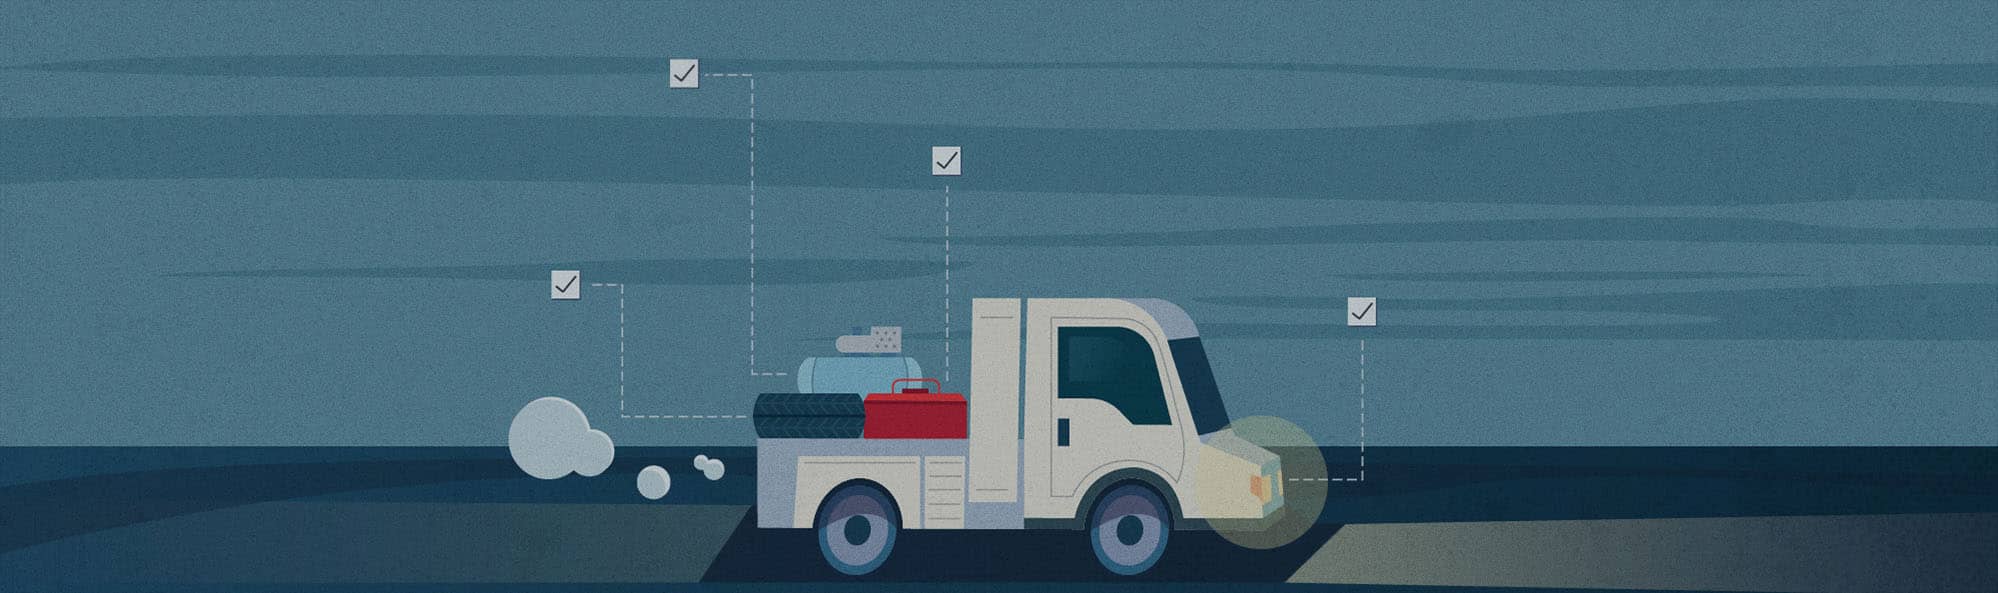 6 Things To Consider When Building a Service Truck